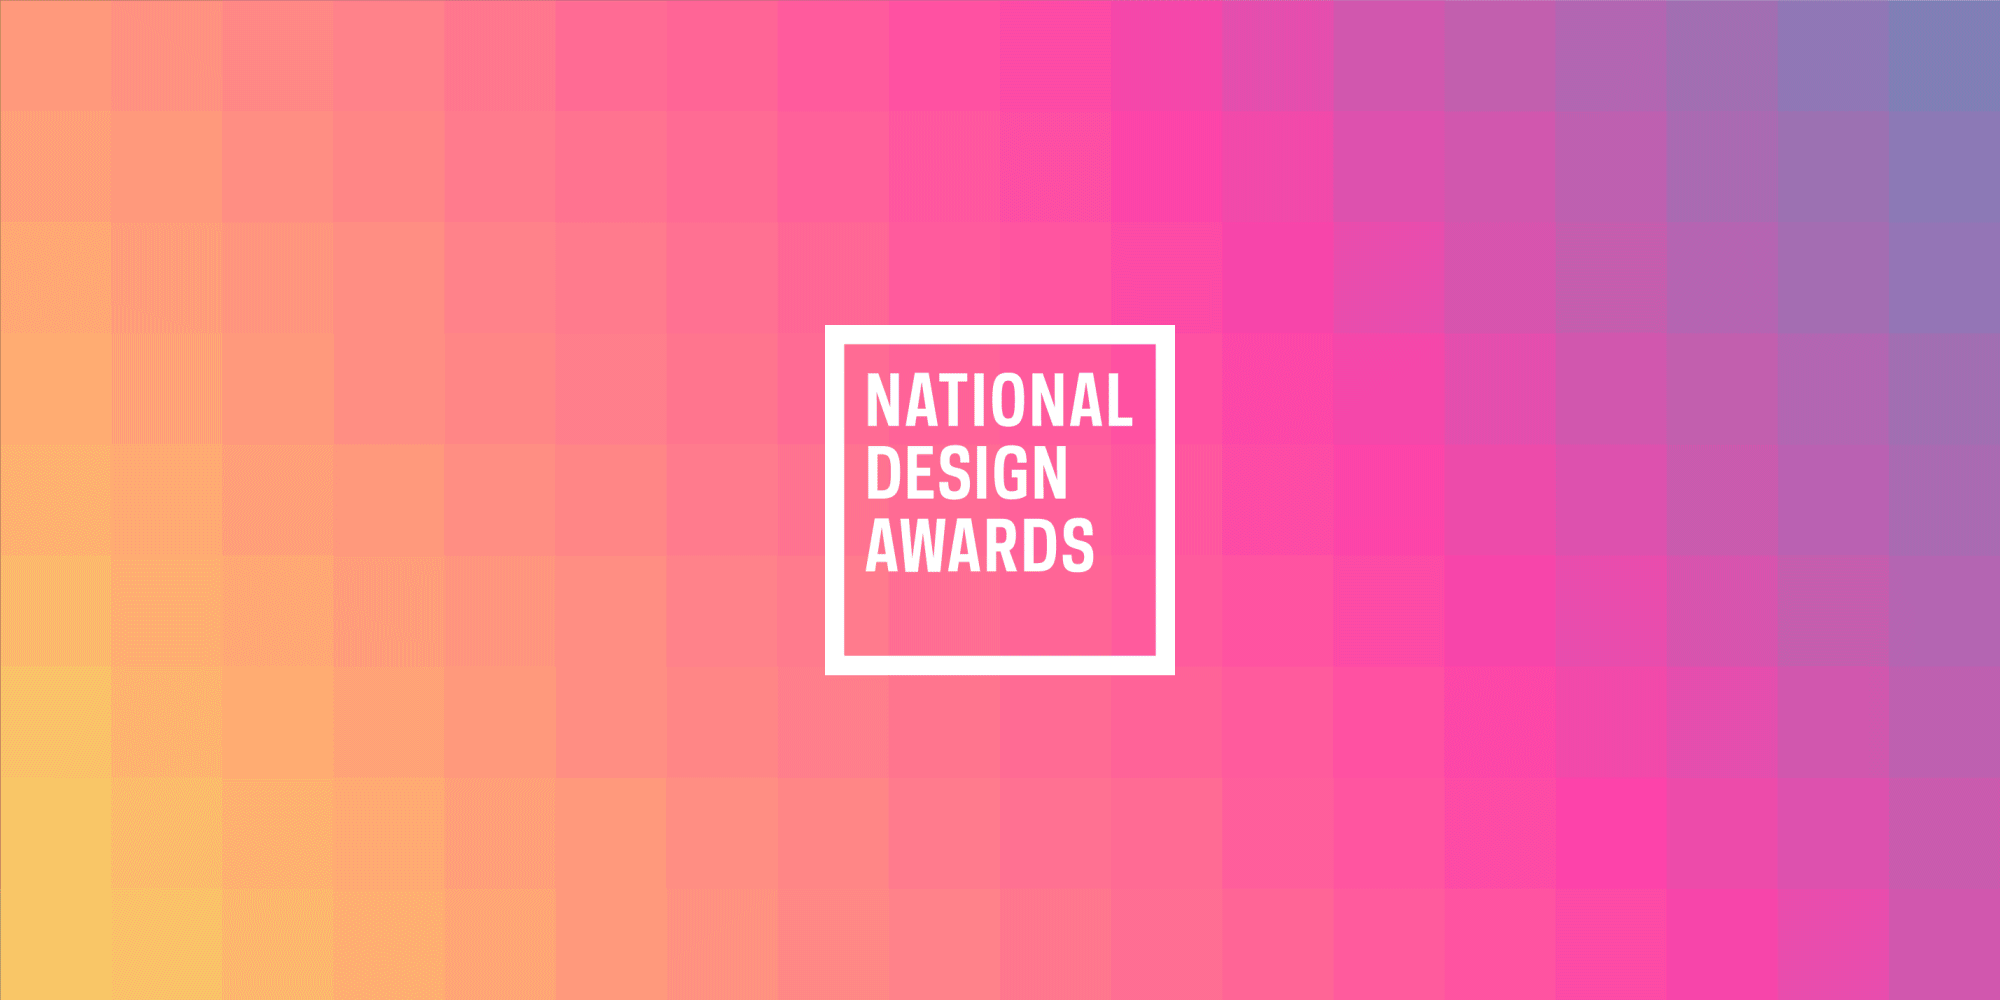 The words "National Design Awards" appear in white on a multi-colored gradient background.